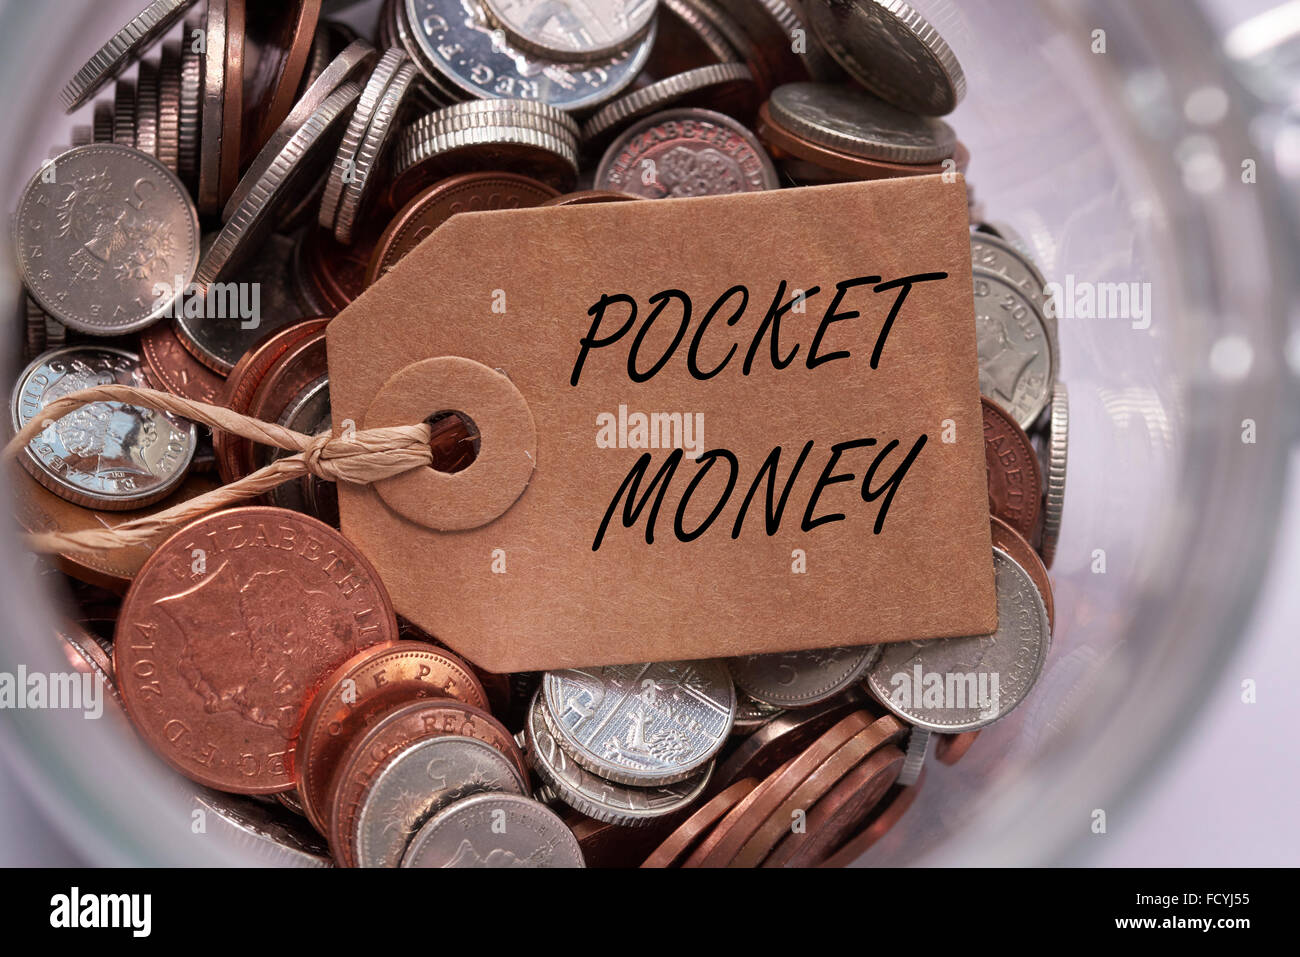 Pocket money label on British mixed coins inside a glass jar concept Stock Photo